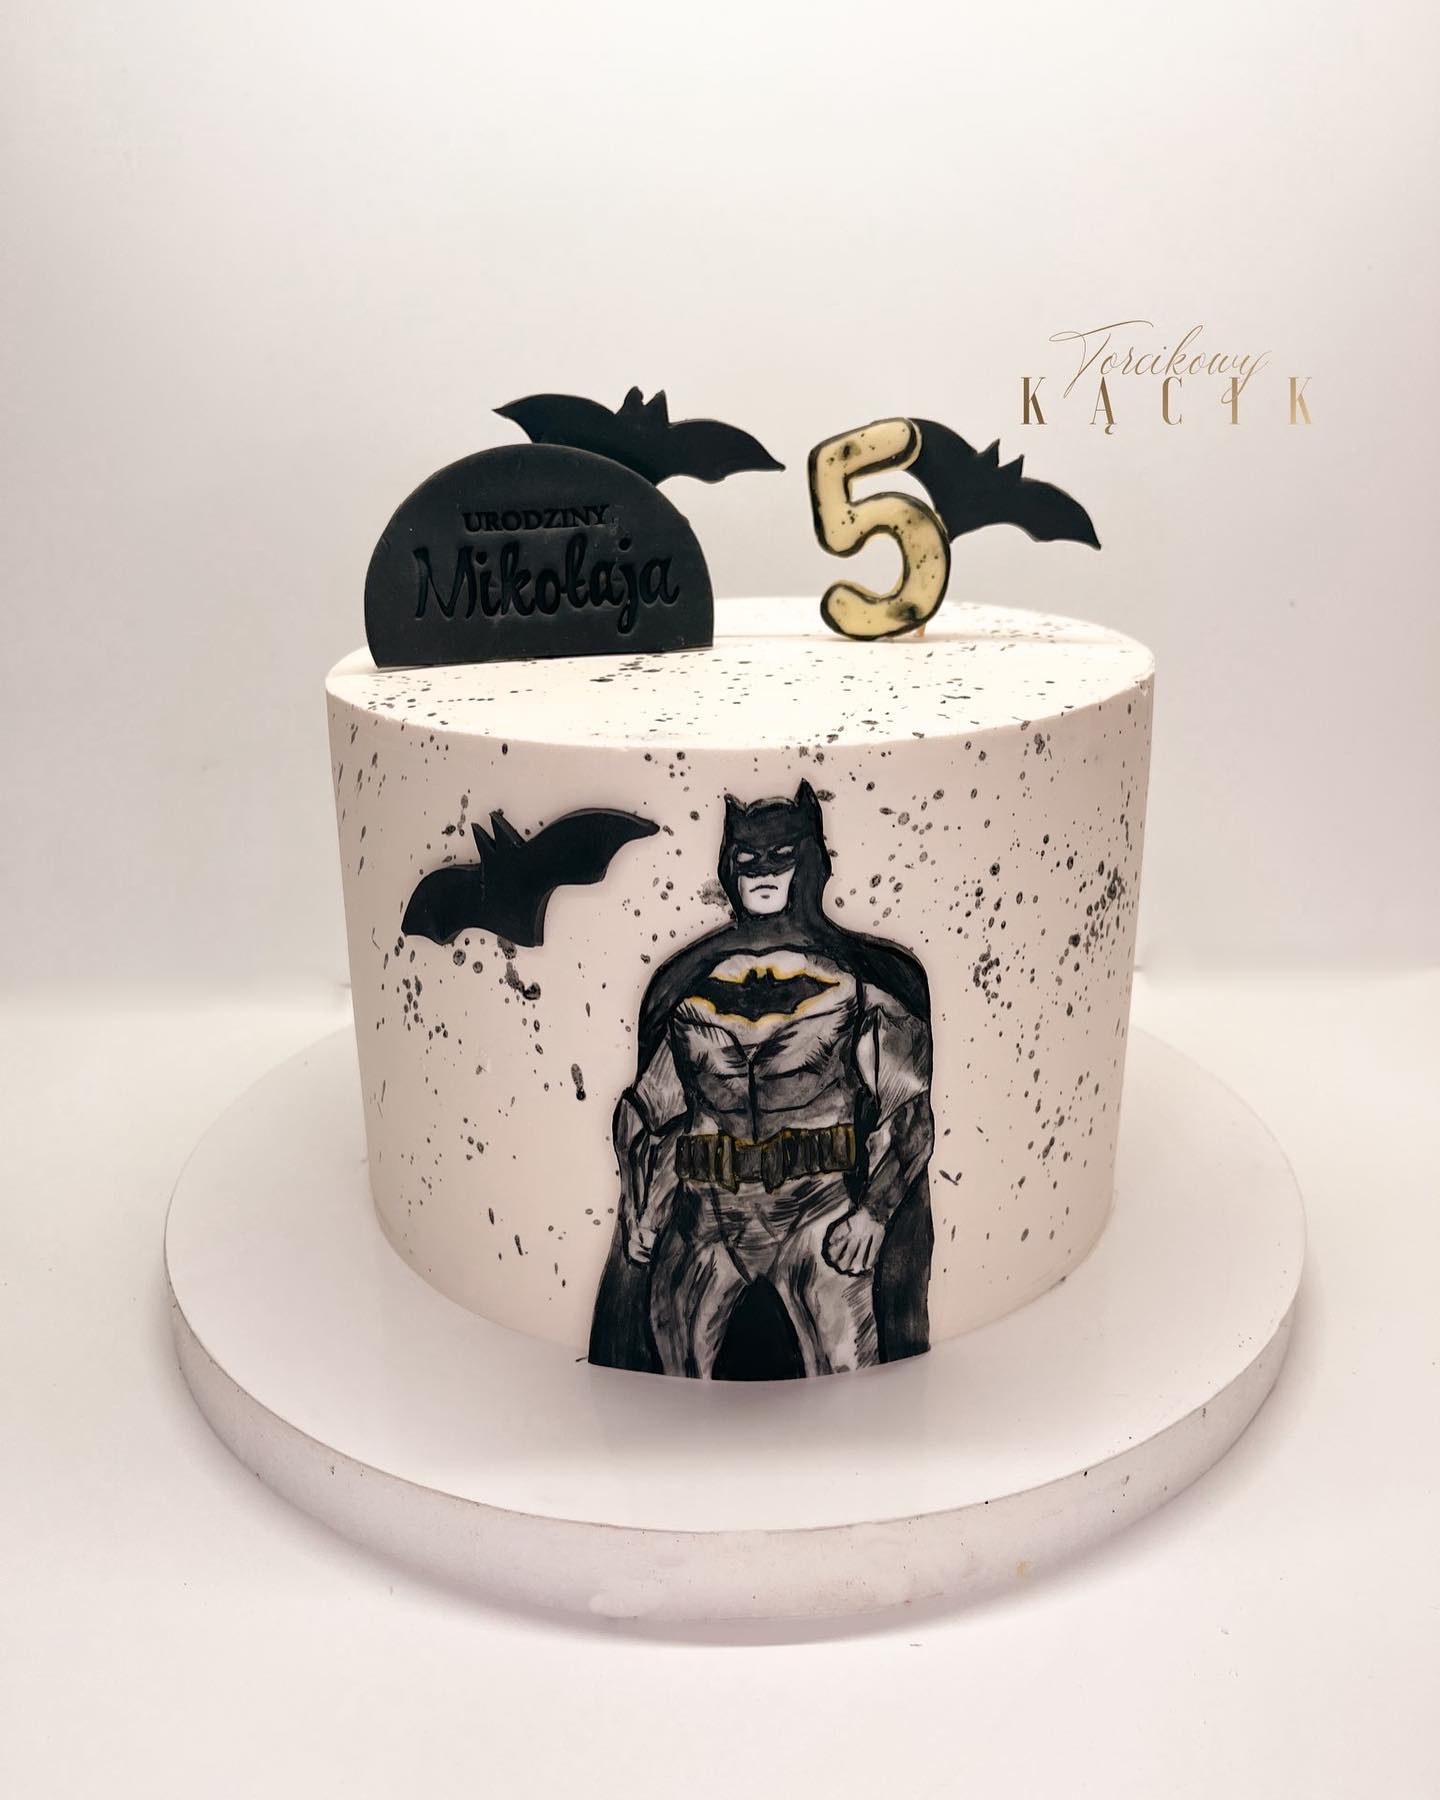 How To Make A Batman Cake | Decorating a Cake Tutorial | #bakersdelight -  YouTube